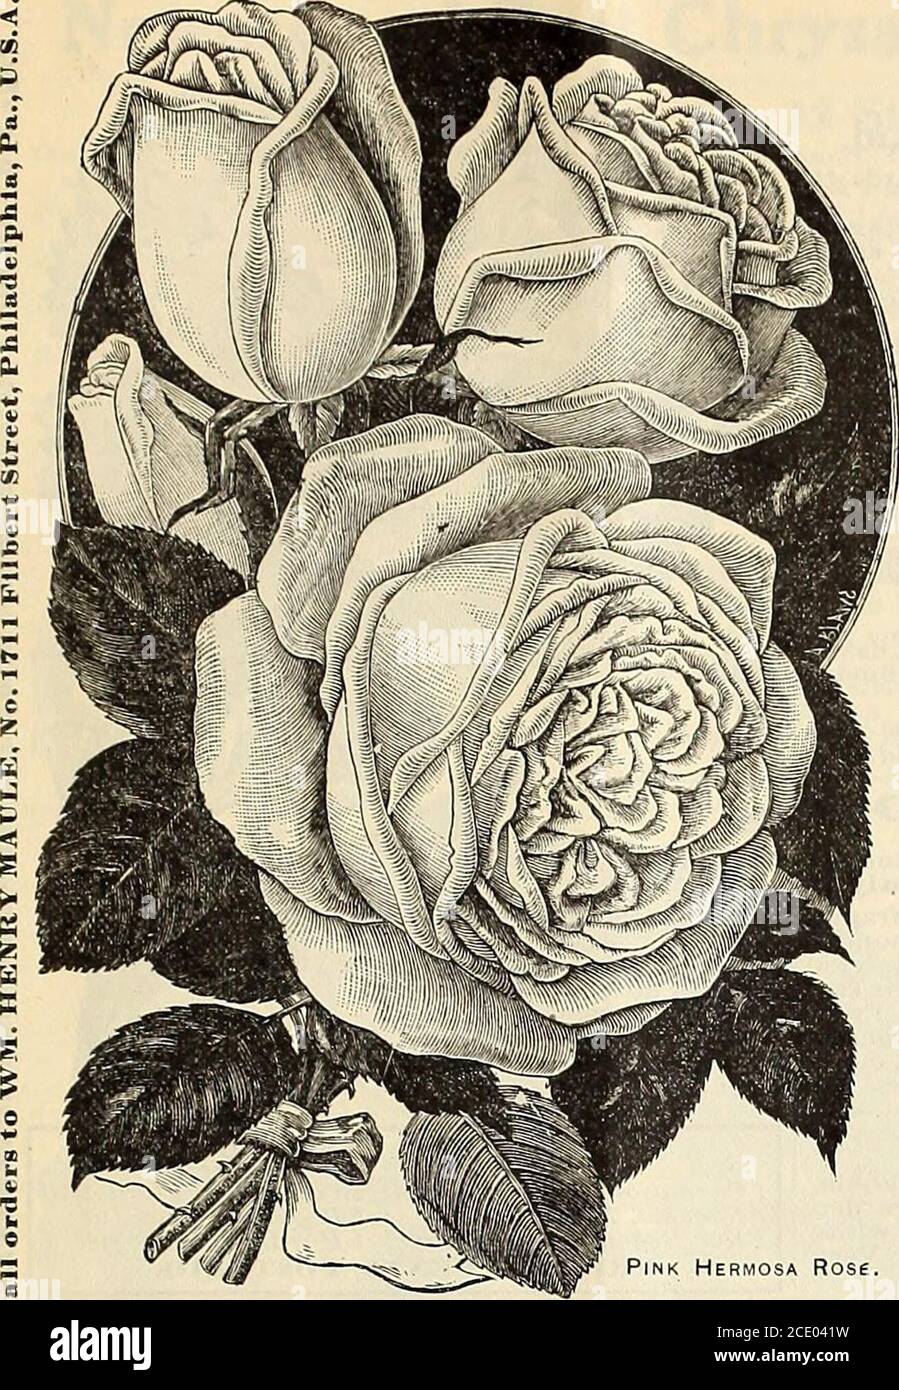 . The Maule seed book for 1905 . OTHILDE SOUPERT. 138. Pink Hermosa Rose. The Beautiful Hermosa Roses. One good plant of asch of the 4 sorts, postpaid, for 45 cents. TELLiOW HERMOSA. Coquette de Lyon. Pure, rich canary yellow.Neat, compact, profuse blooming plant, fine bedder.WHITE HERMOSA. Creamy white flowers and beautiful buds.RED HERMOSA. Extra choice as a bedder or for pot culture.PINK, HERMOSA. Desirable and popular, liright, clear pink. Price of any of the Hermosa Roses, 15 cents each: 2 for 2.5 cents; postpaid.2-year-old, 35 cents each; $3.50 per dozen, by express. The La France Roses. Stock Photo